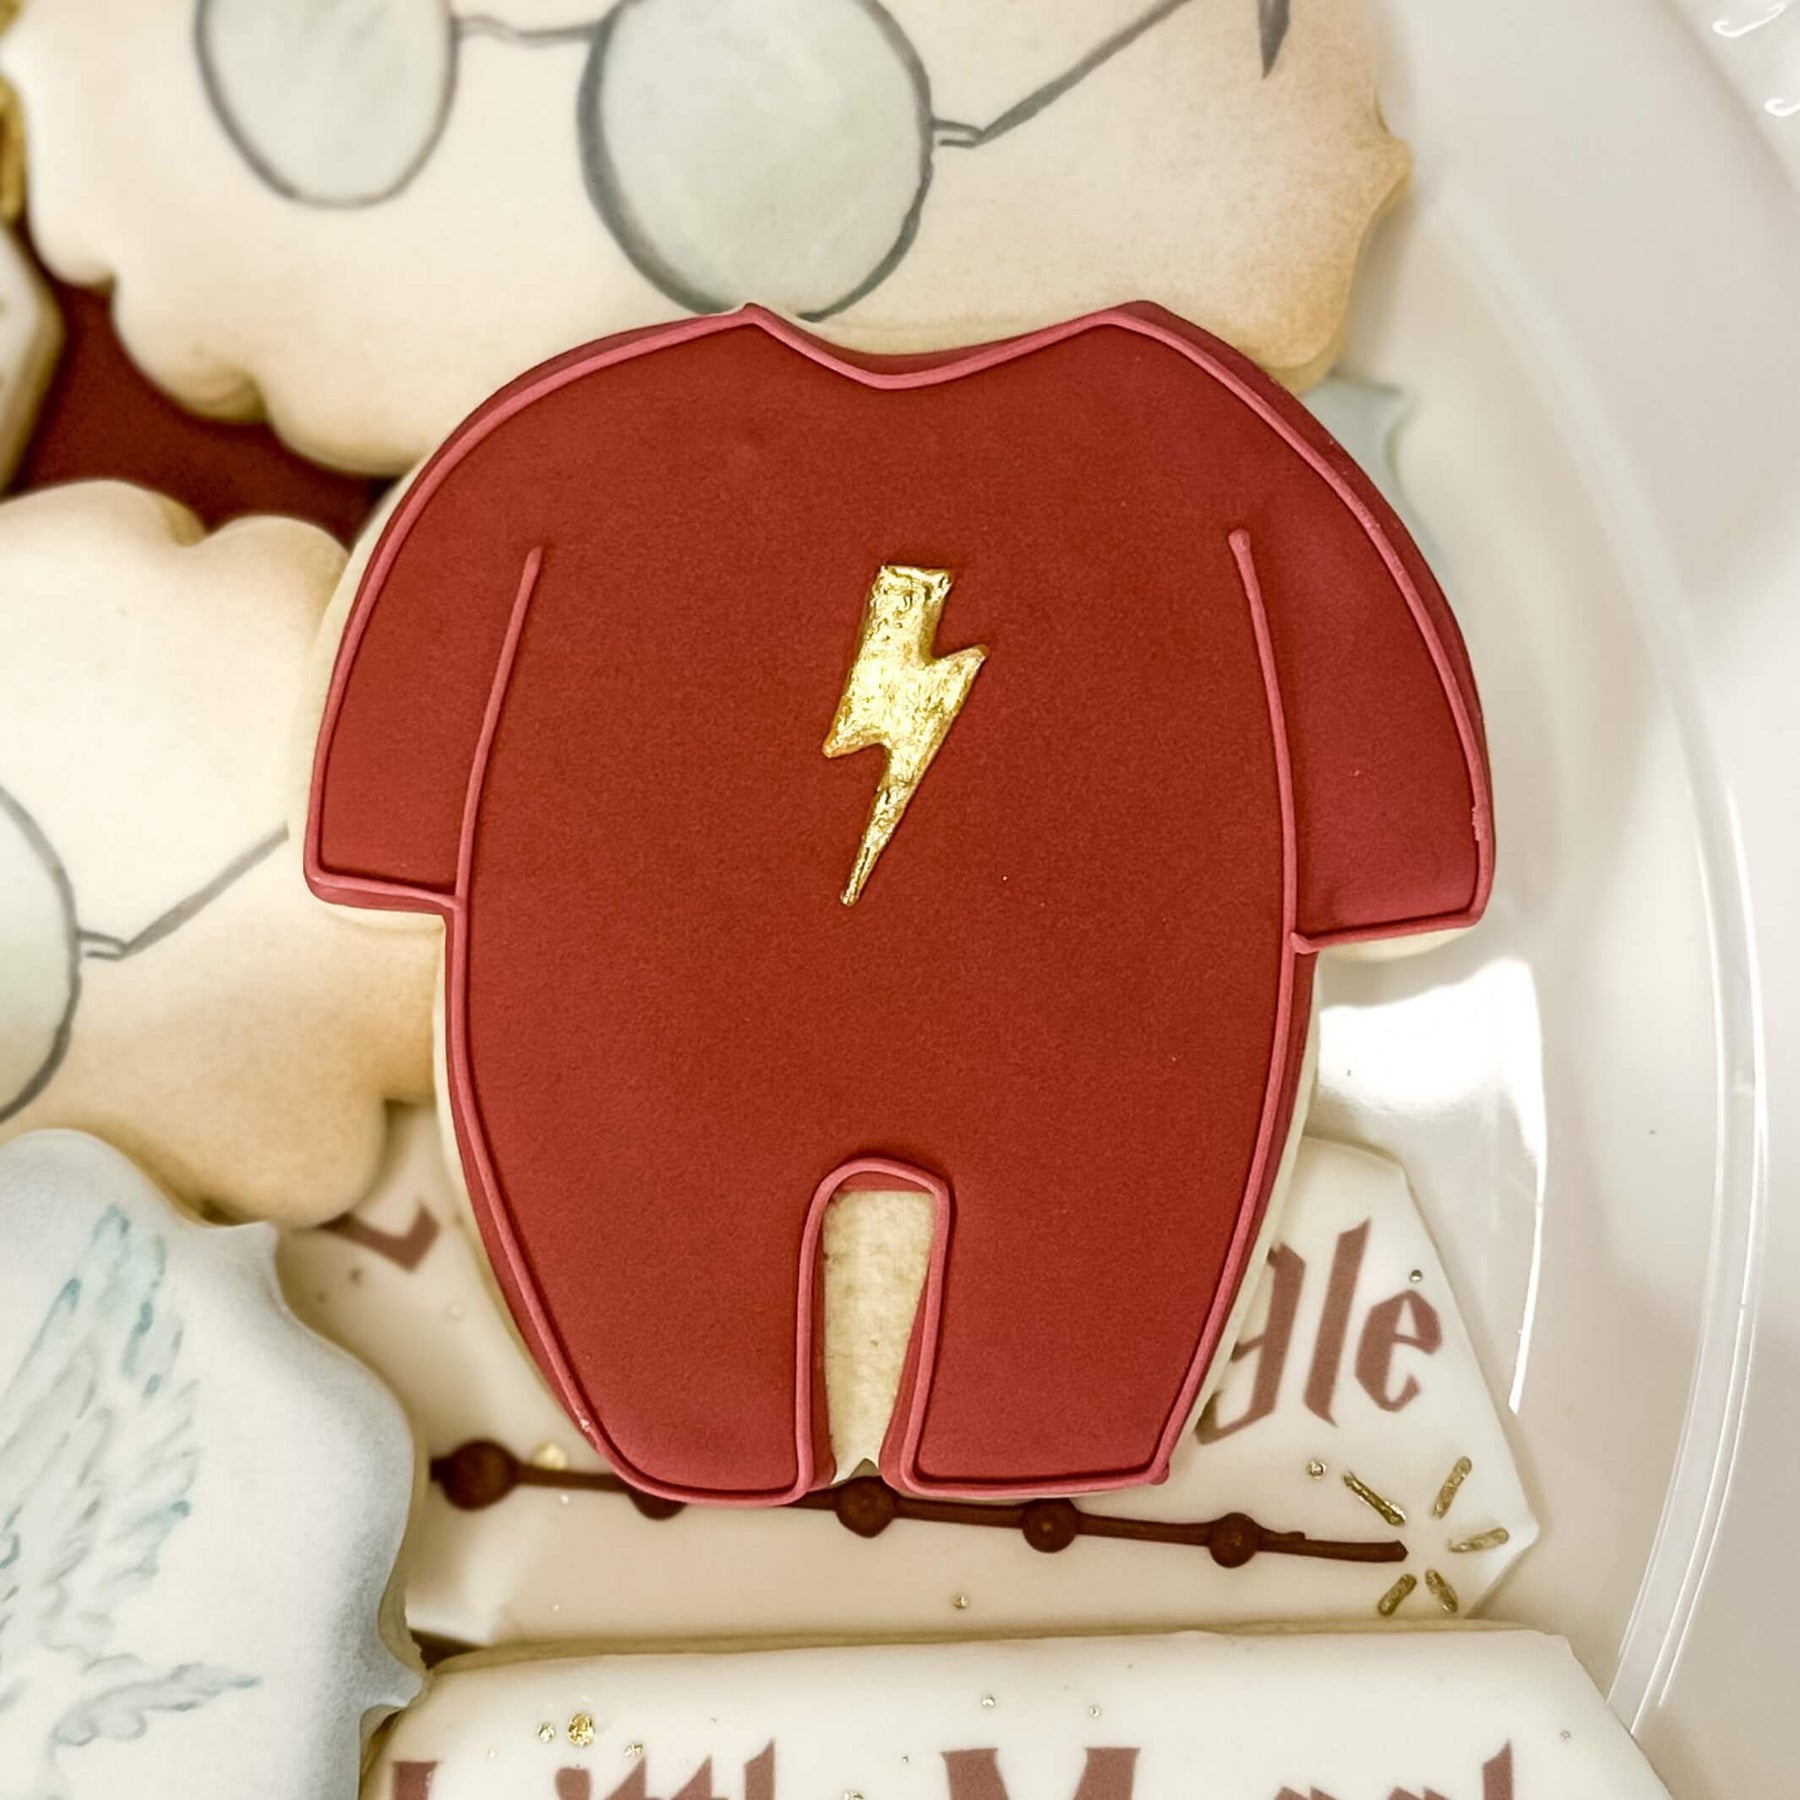 Baby Shower Cookies for A Harry Potter Fan. It's time to snuggle a